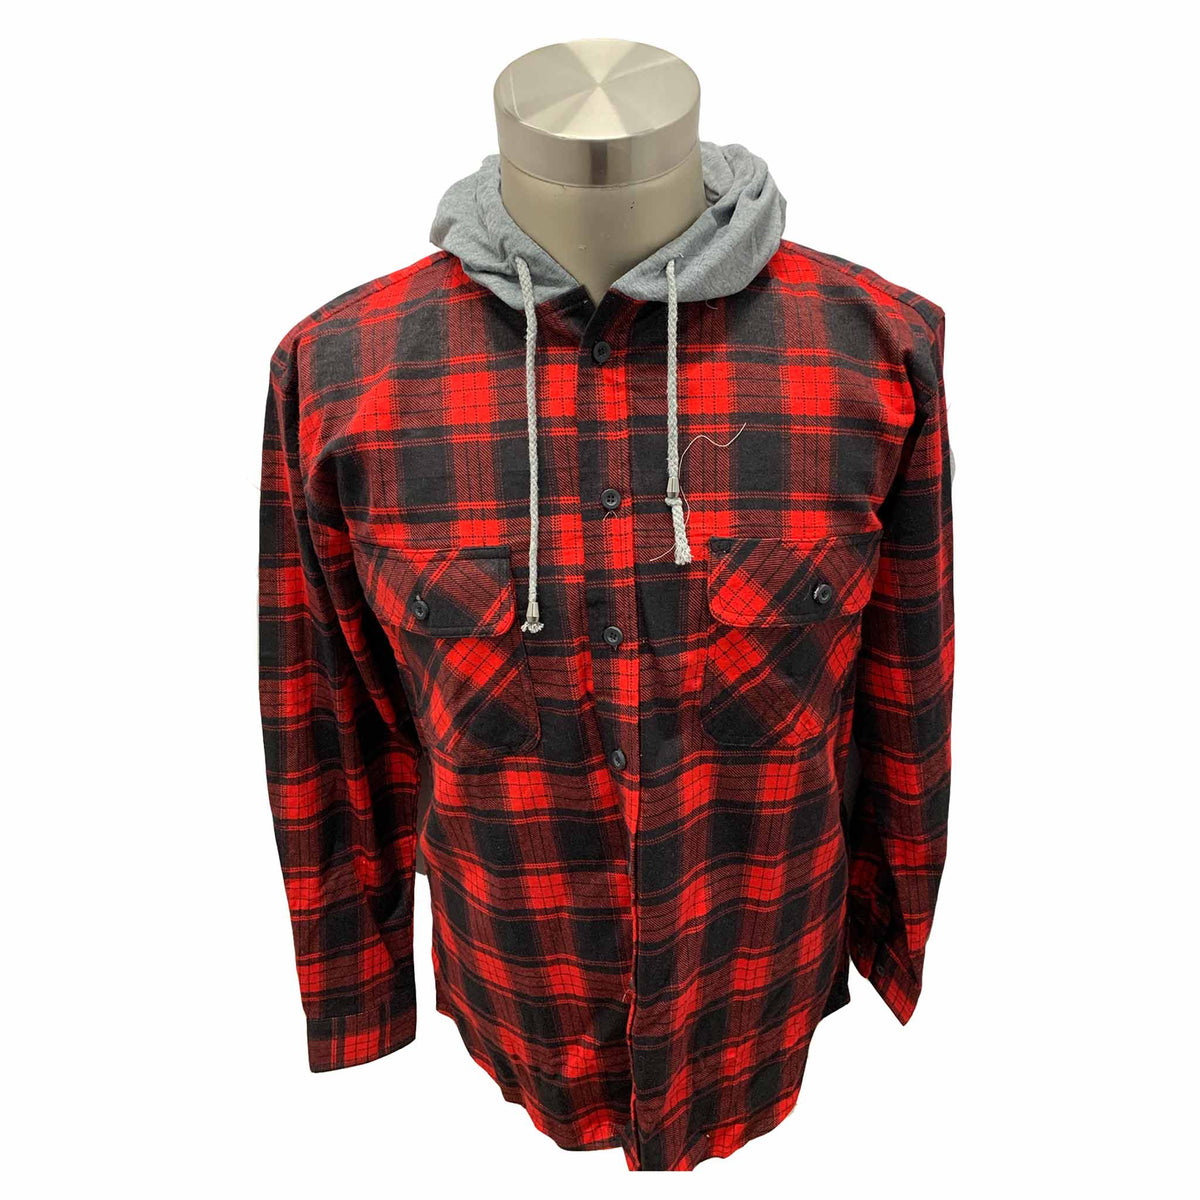 red flannelette shirt with hood